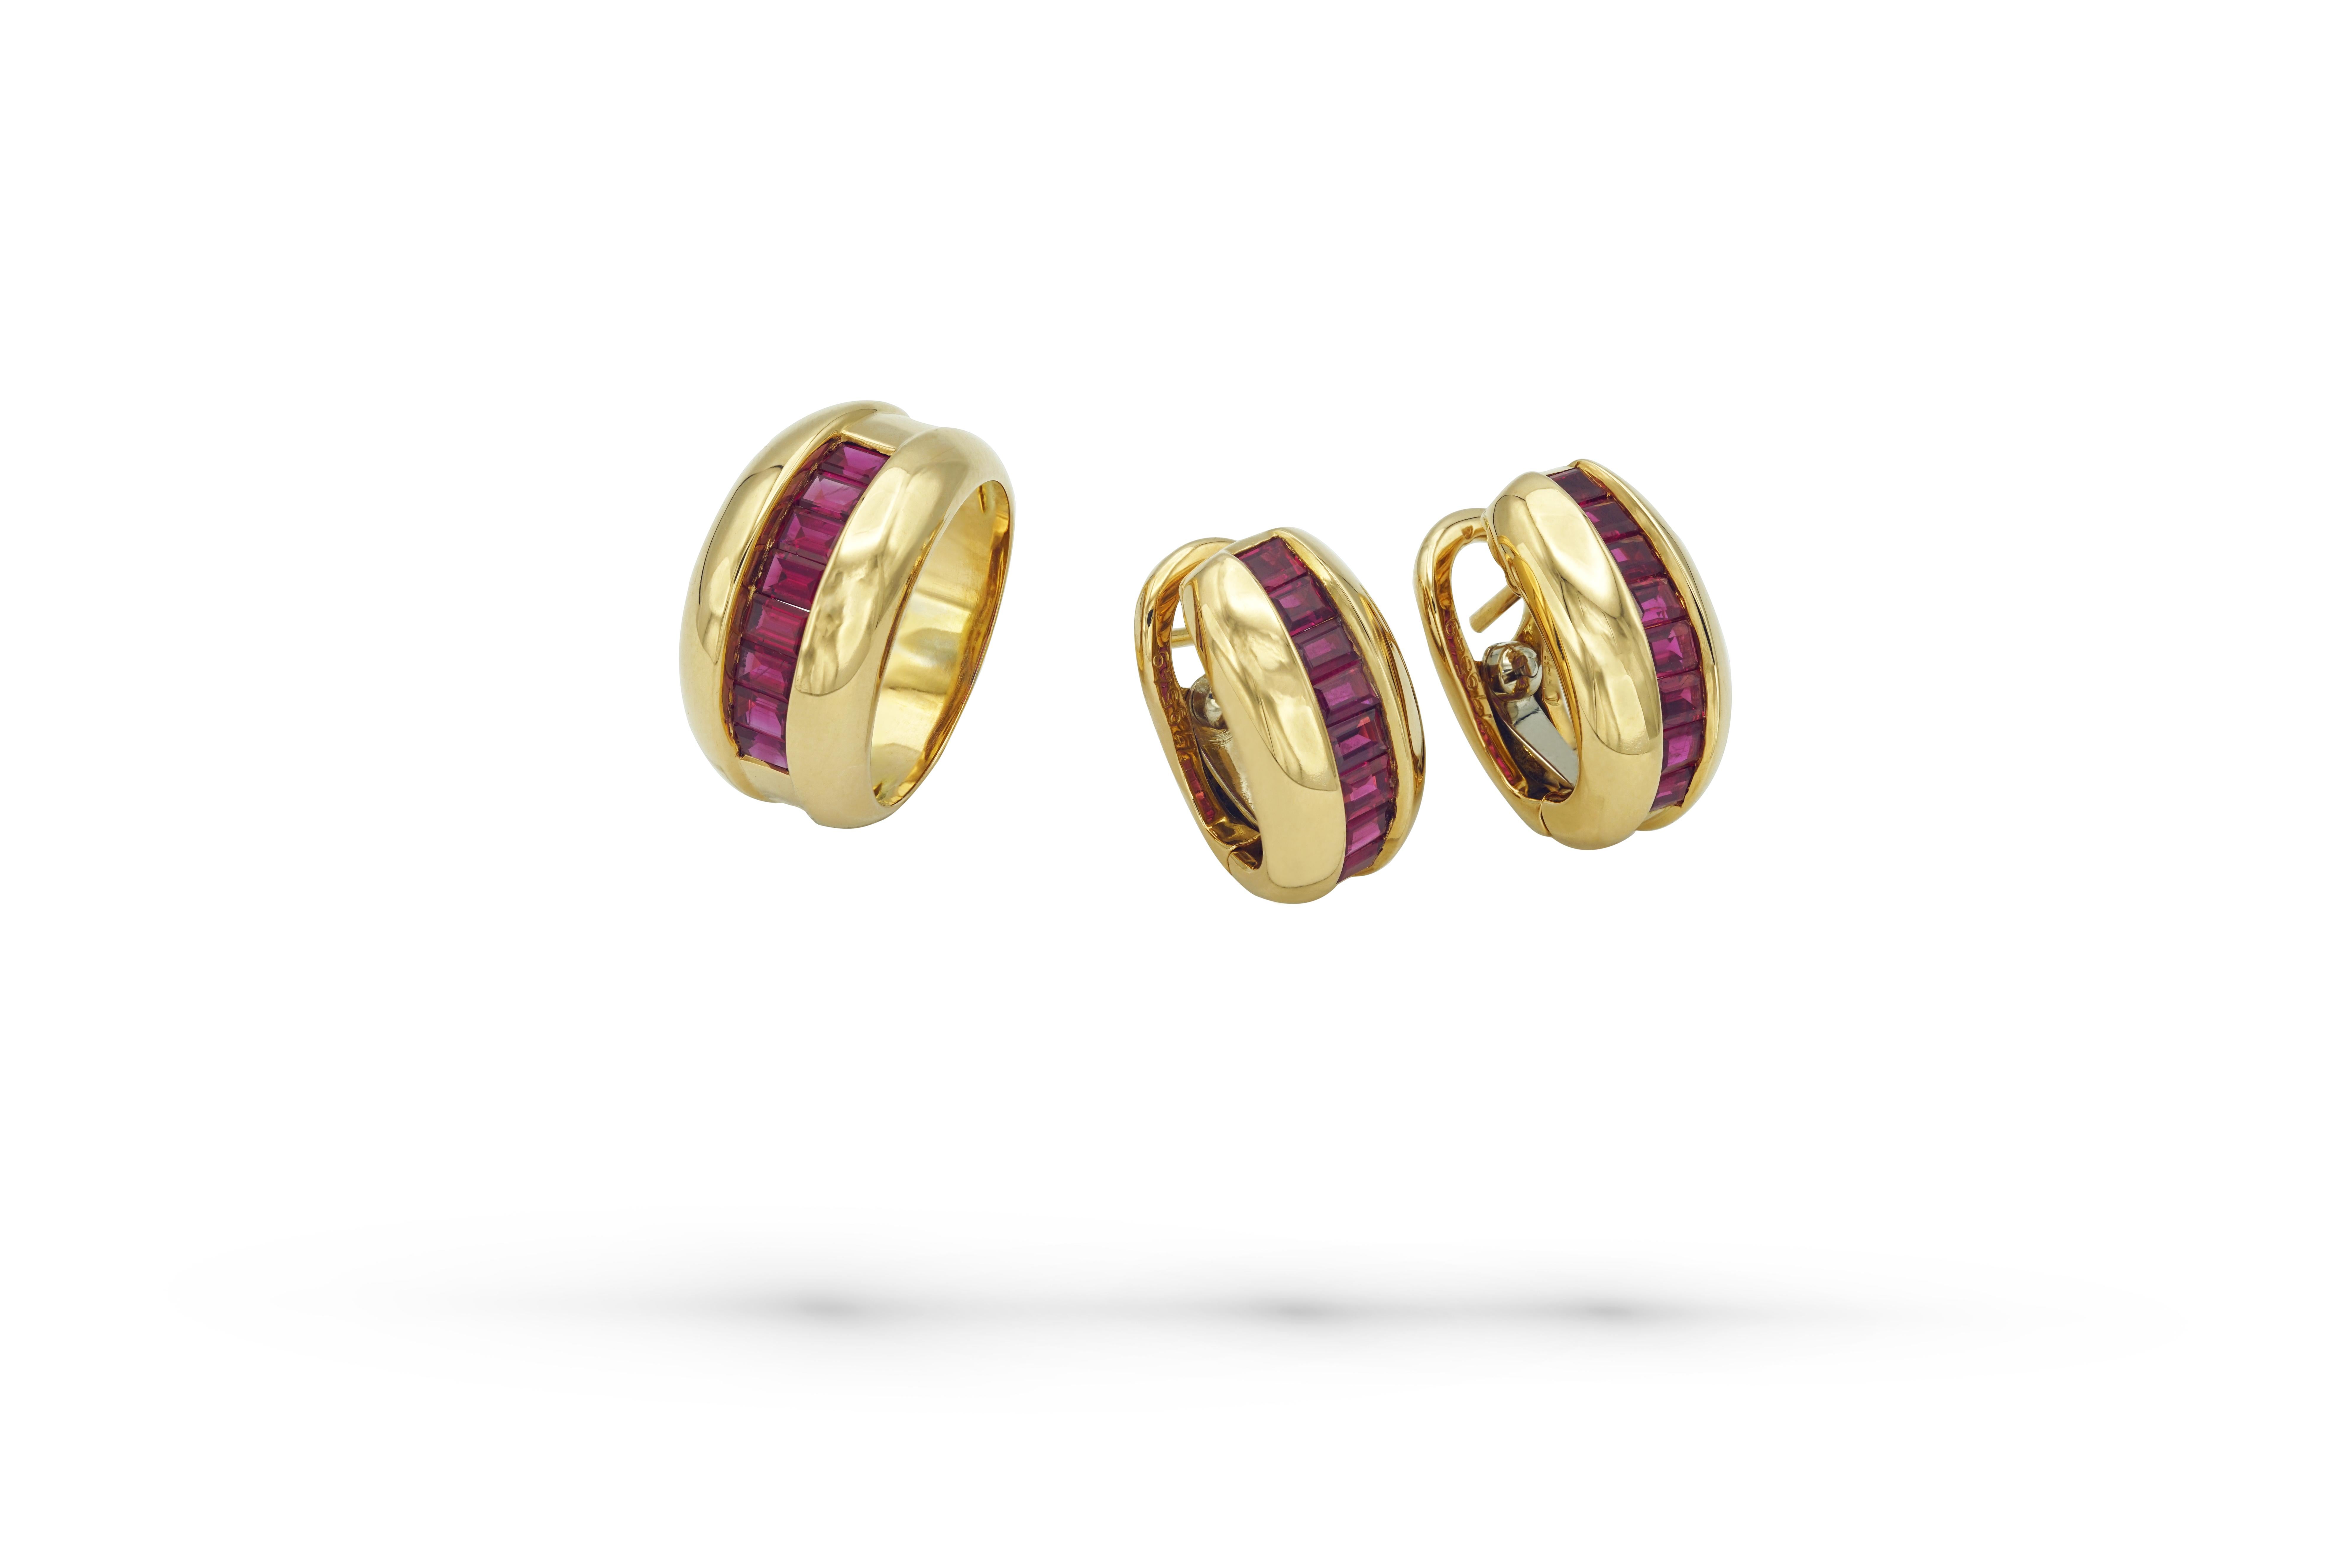 Women's Cartier Ruby Gold Ring And Earrings